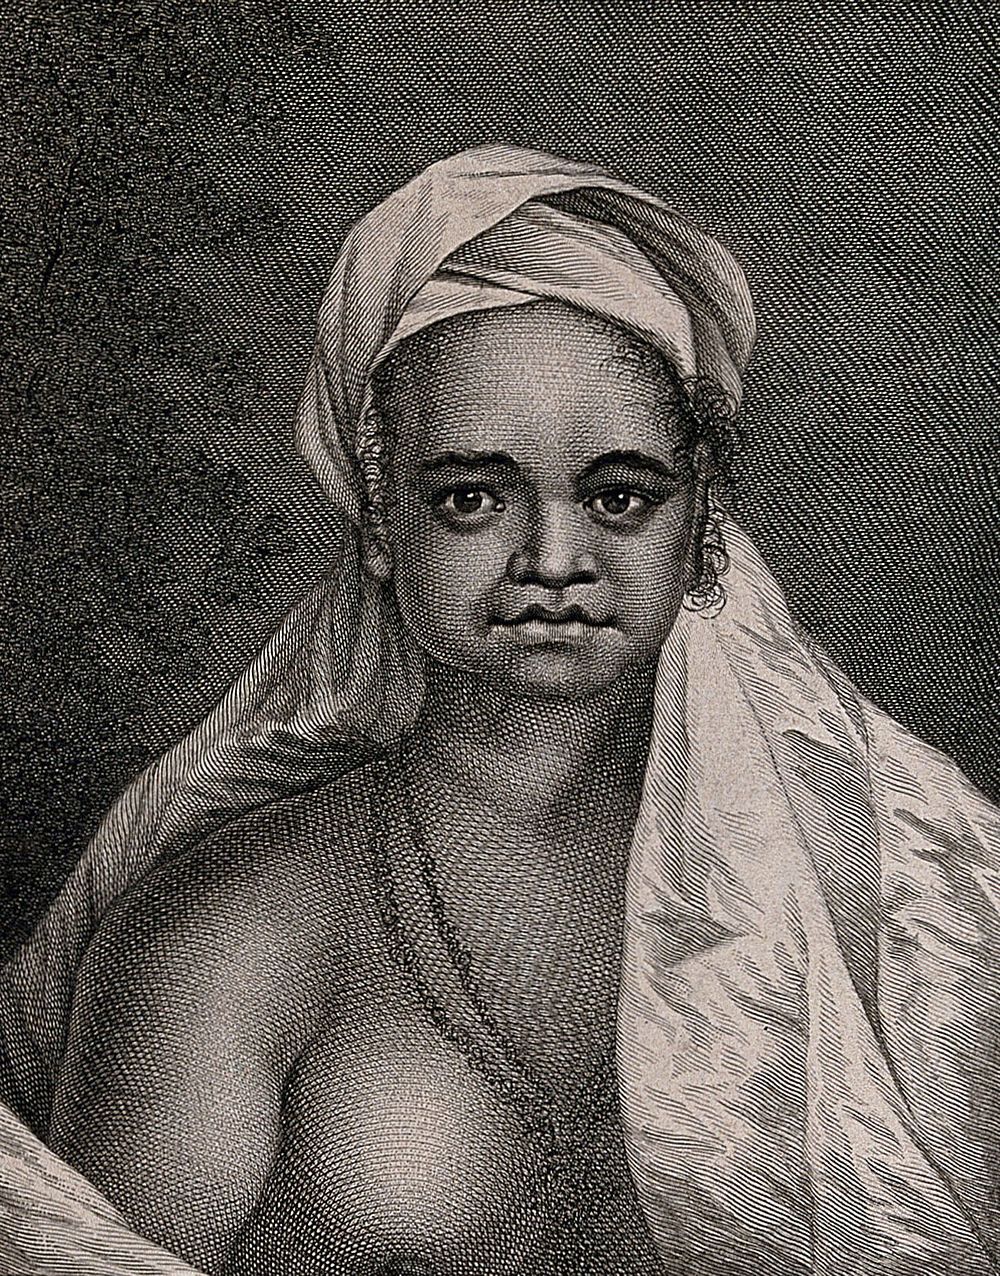 A woman from the island of Tahuata, Polynesia, encountered by Captain Cook on his second voyage. Engraving by J. Hall, 1777…